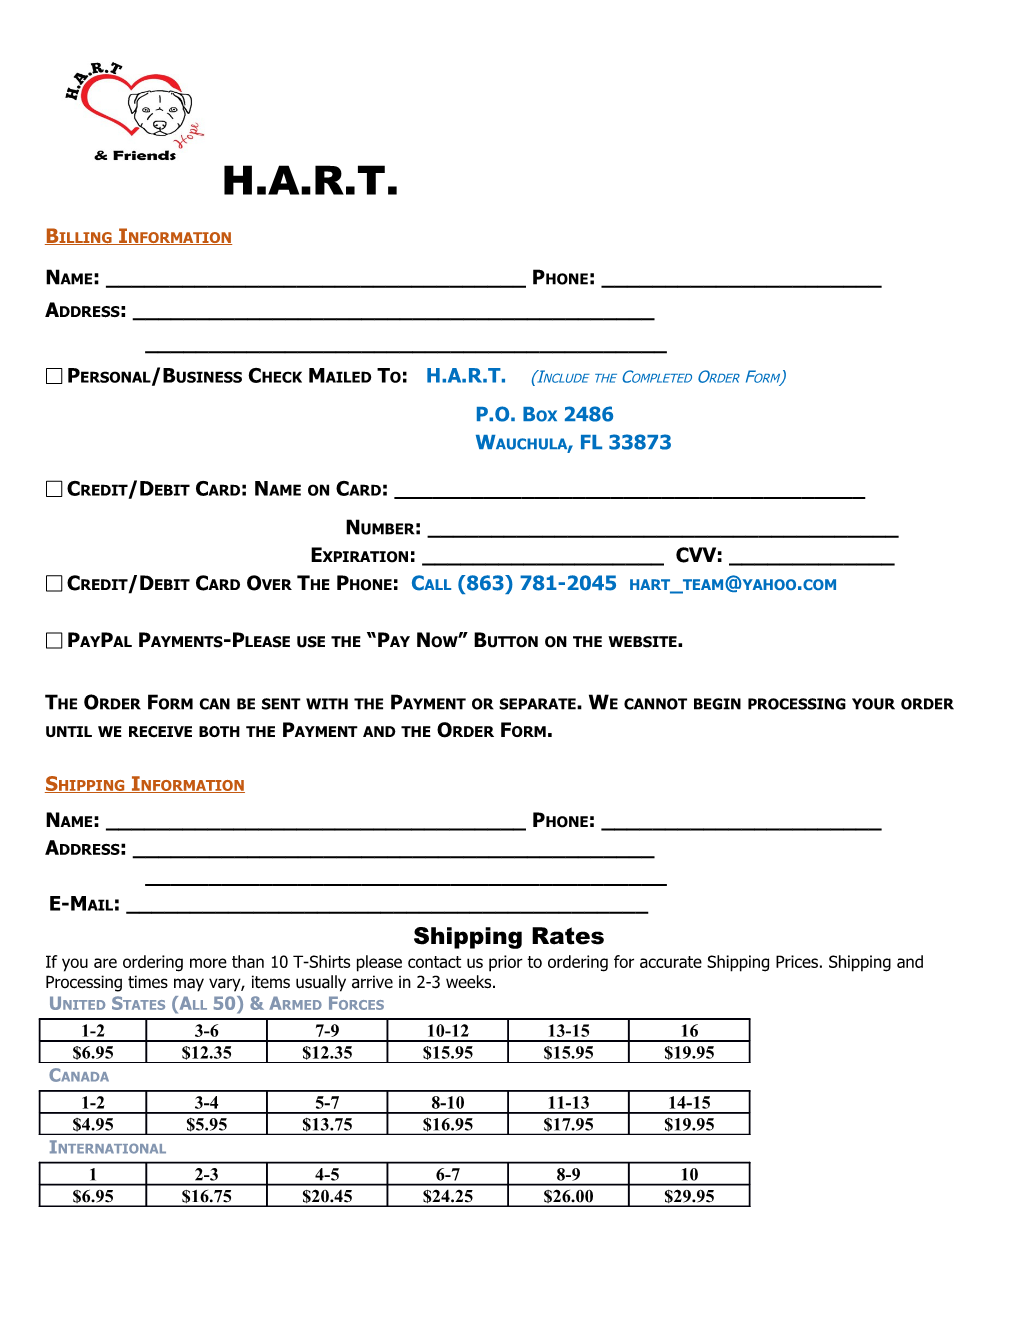 Personal/Business Check Mailed To: H.A.R.T. (Include the Completed Order Form)